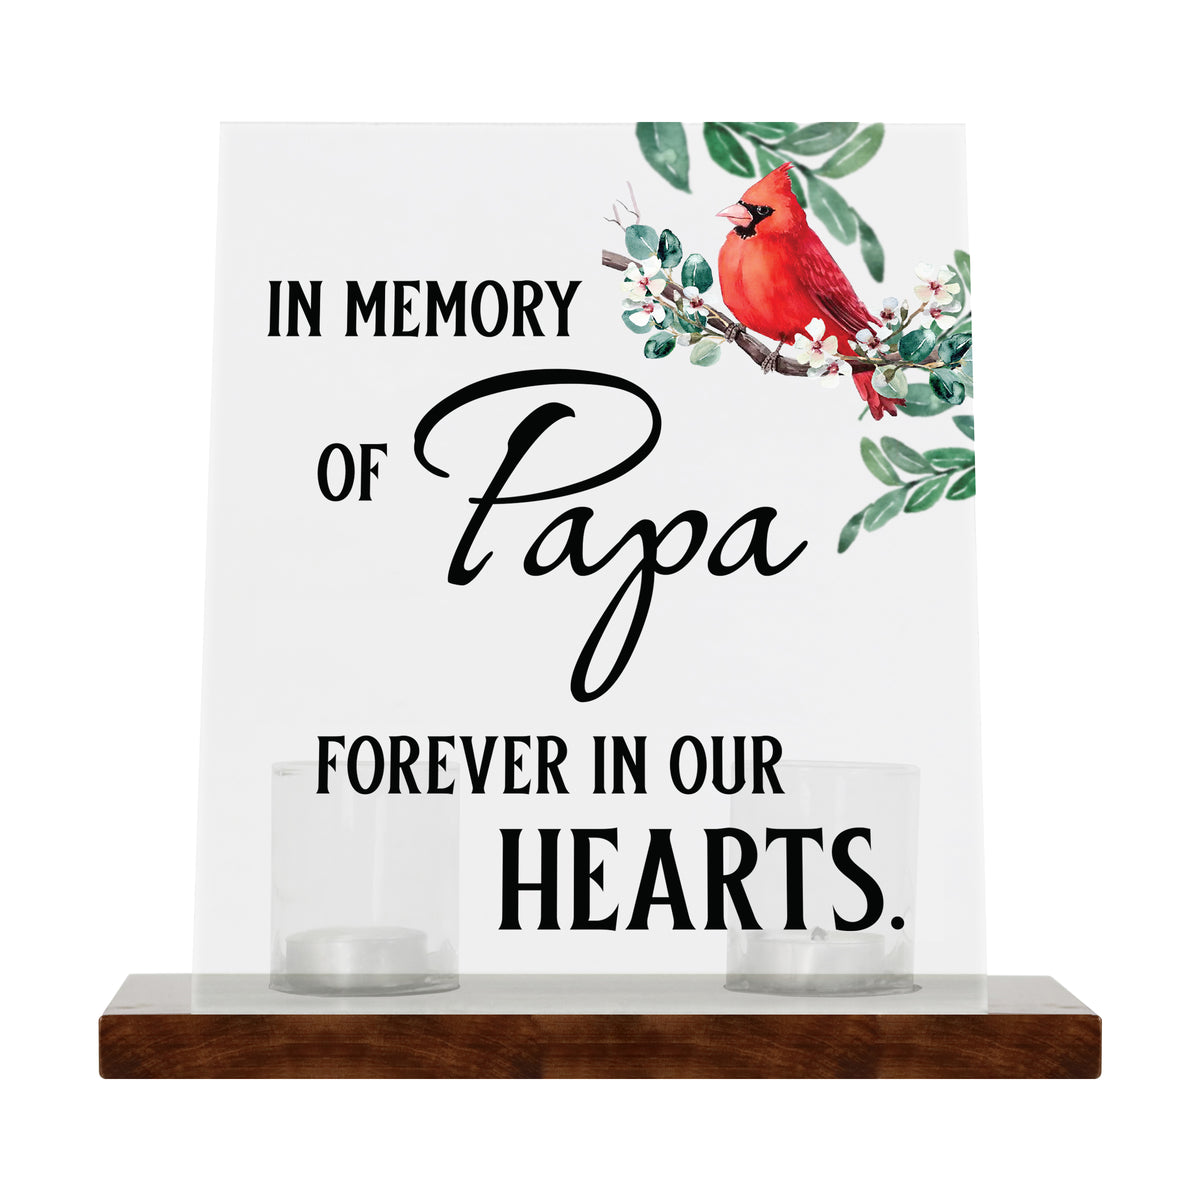 LifeSong Memorials Vintage Memorial Cardinal Acrylic Sign Candle Holder With Wood Base And Glass Votives For Home Decor | In Memory Of Papa. Acrylic candle holders, Vintage acrylic candle holders, glass candle holders for Living Room, Bedroom, Kitchen, Dining Room, and Entryways decor perfect memorial bereavement keepsake gift ideas for Family &amp; Friends.